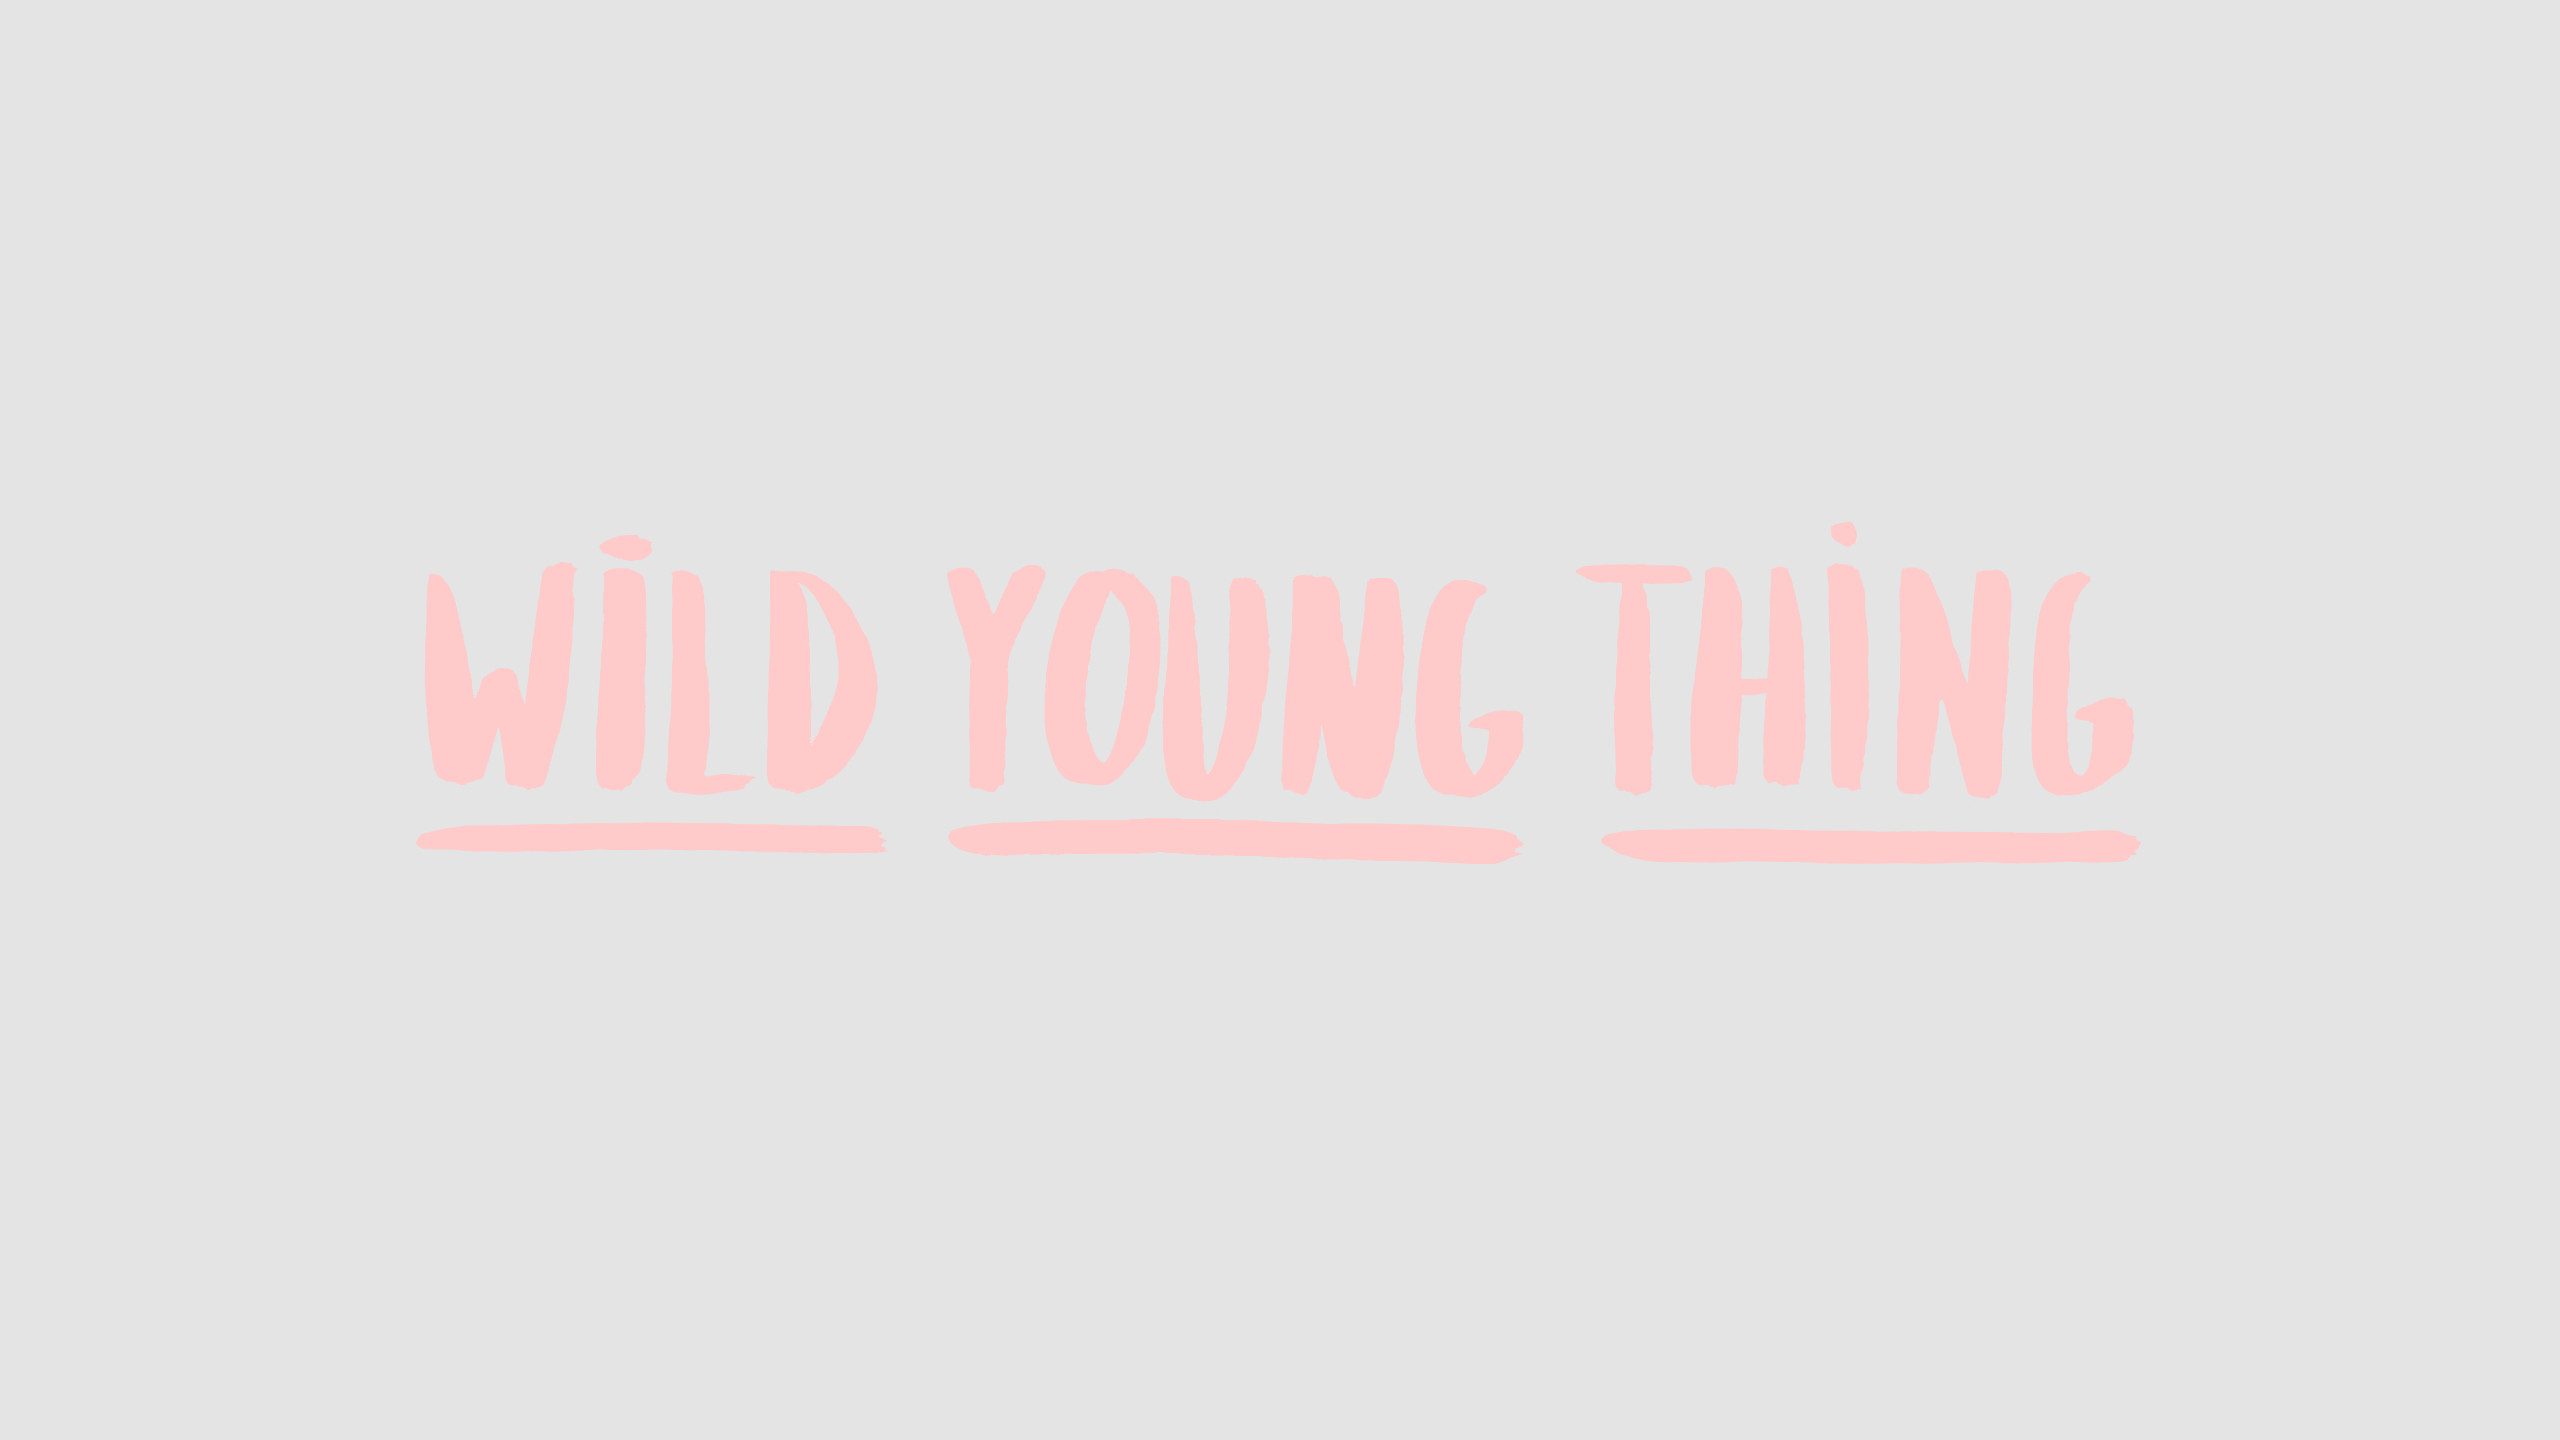 2560x1440 Pastel grey pink Wild young thing desktop wallpaper background | Words to  live by | Pinterest | Wallpaper backgrounds, Wallpaper and Desktop  backgrounds